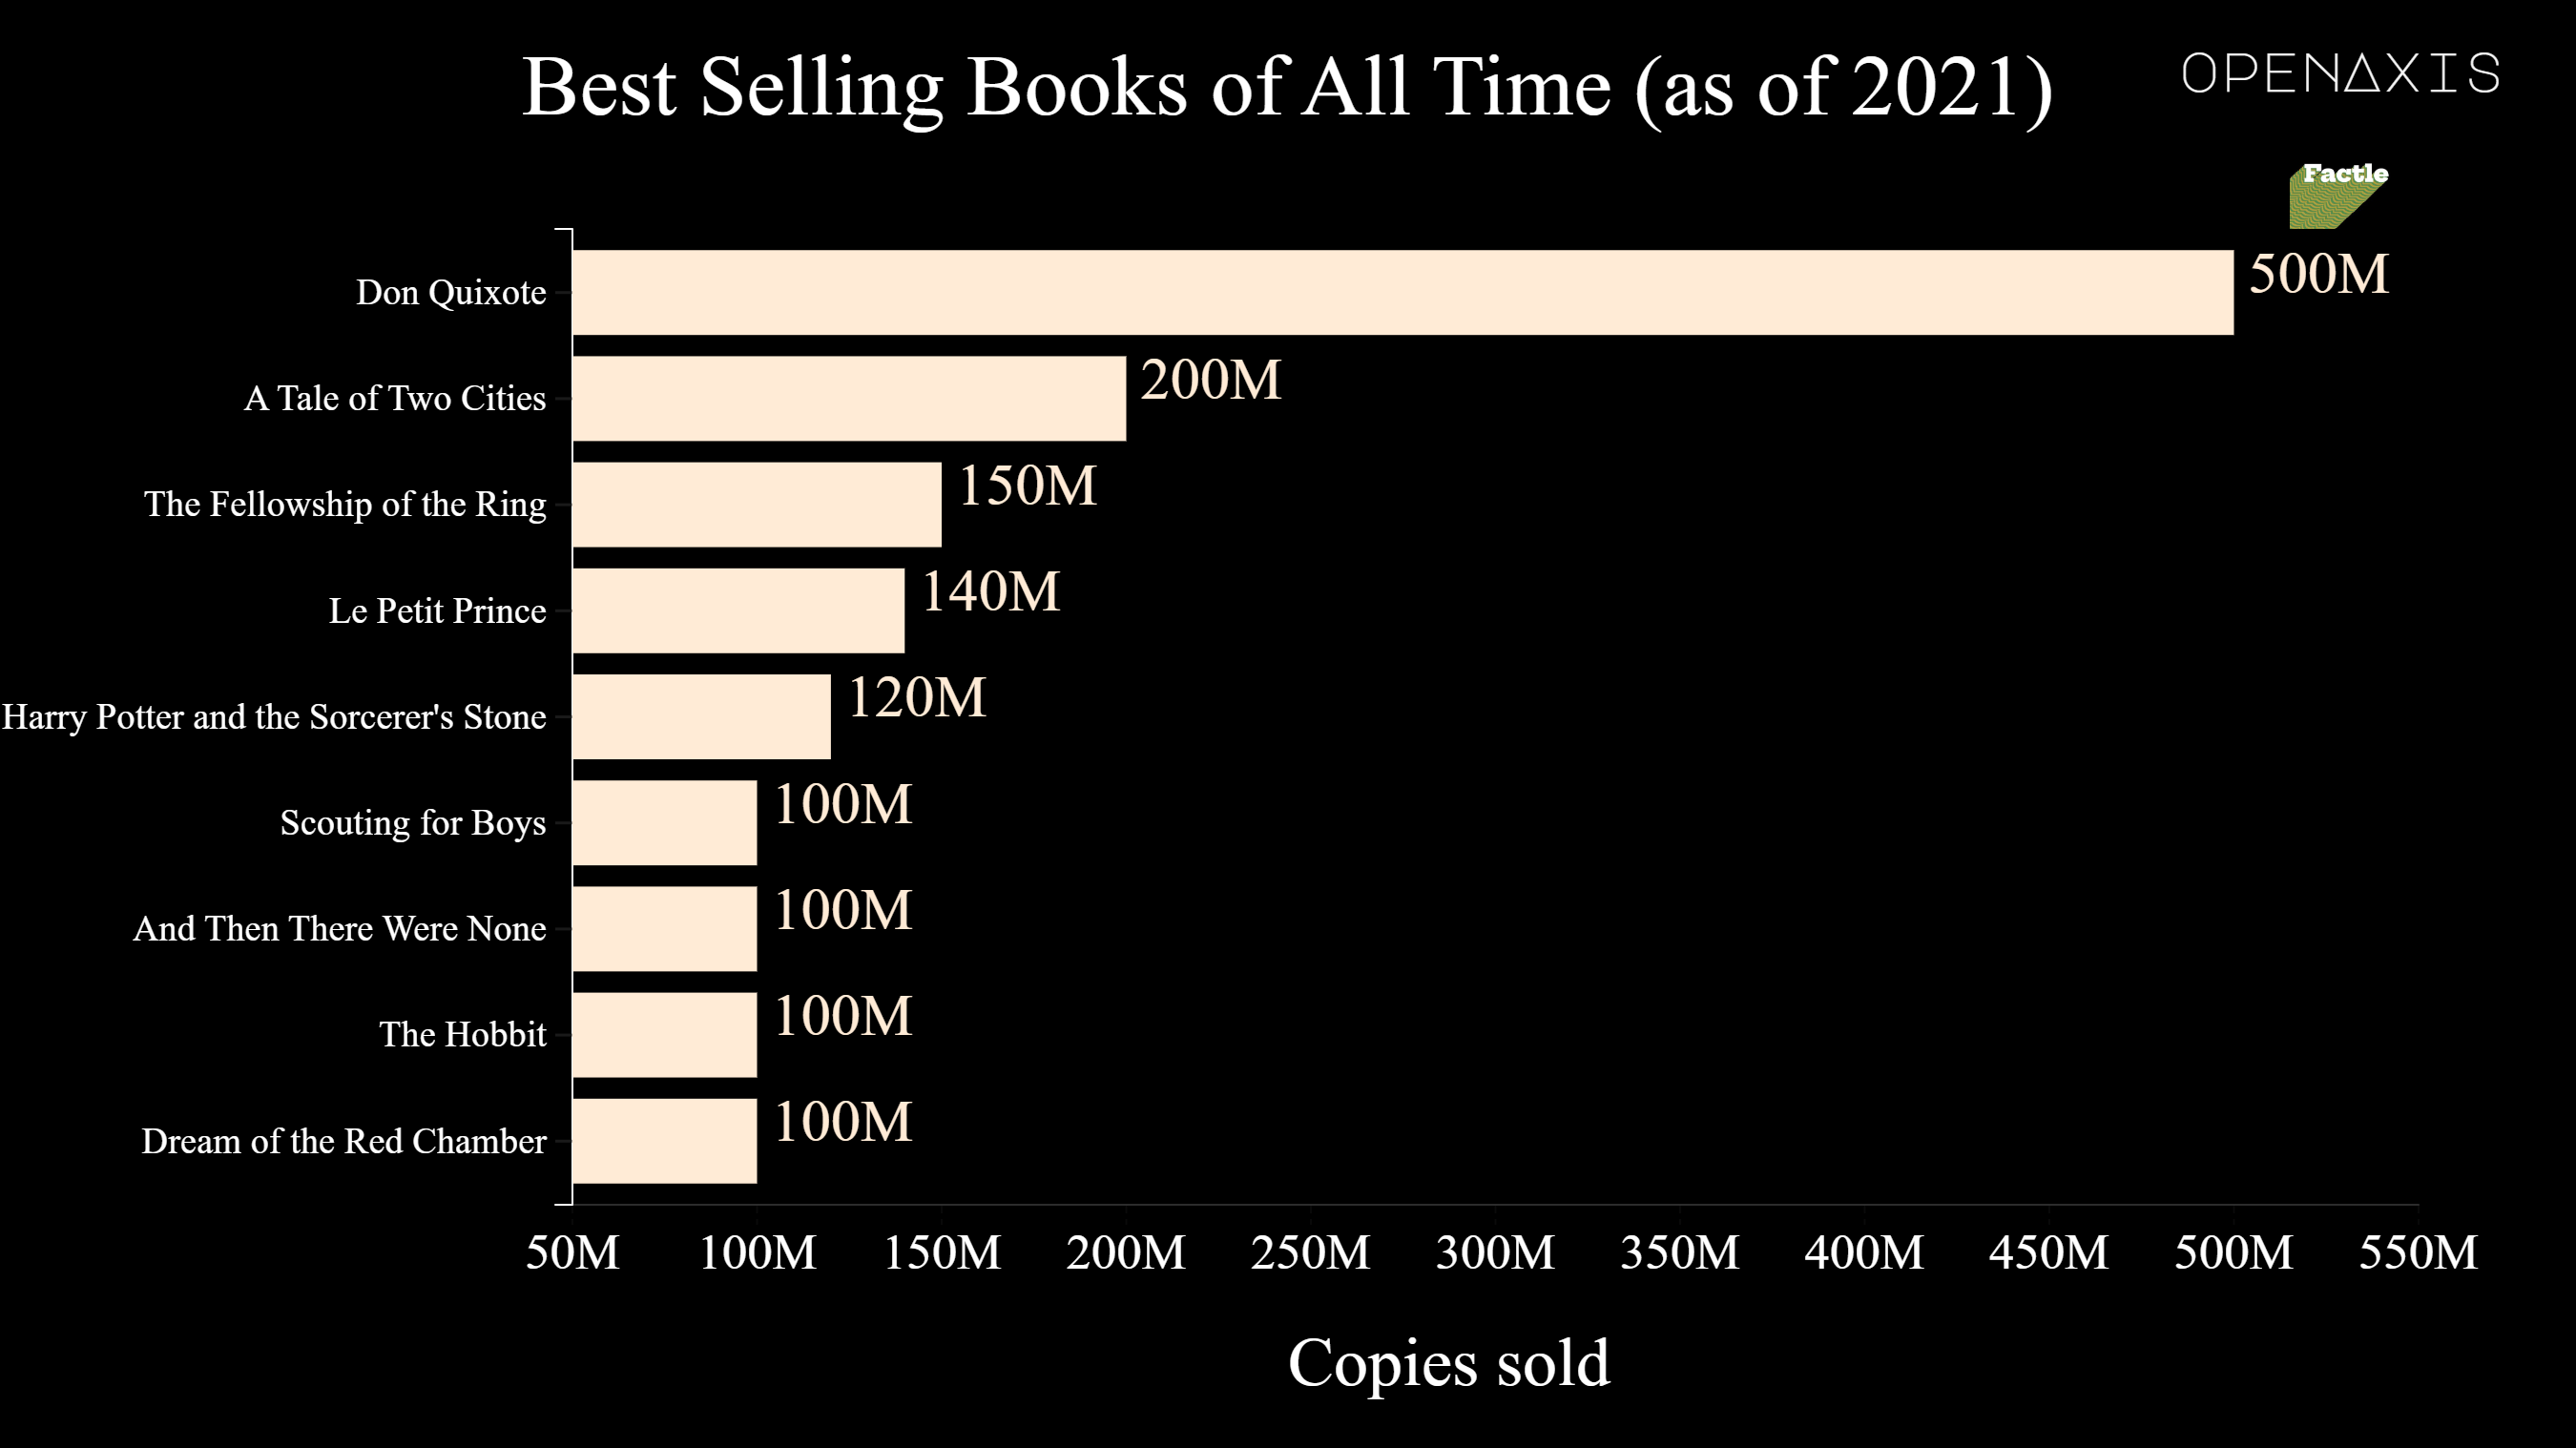 "Best Selling Books of All Time (as of 2021)"